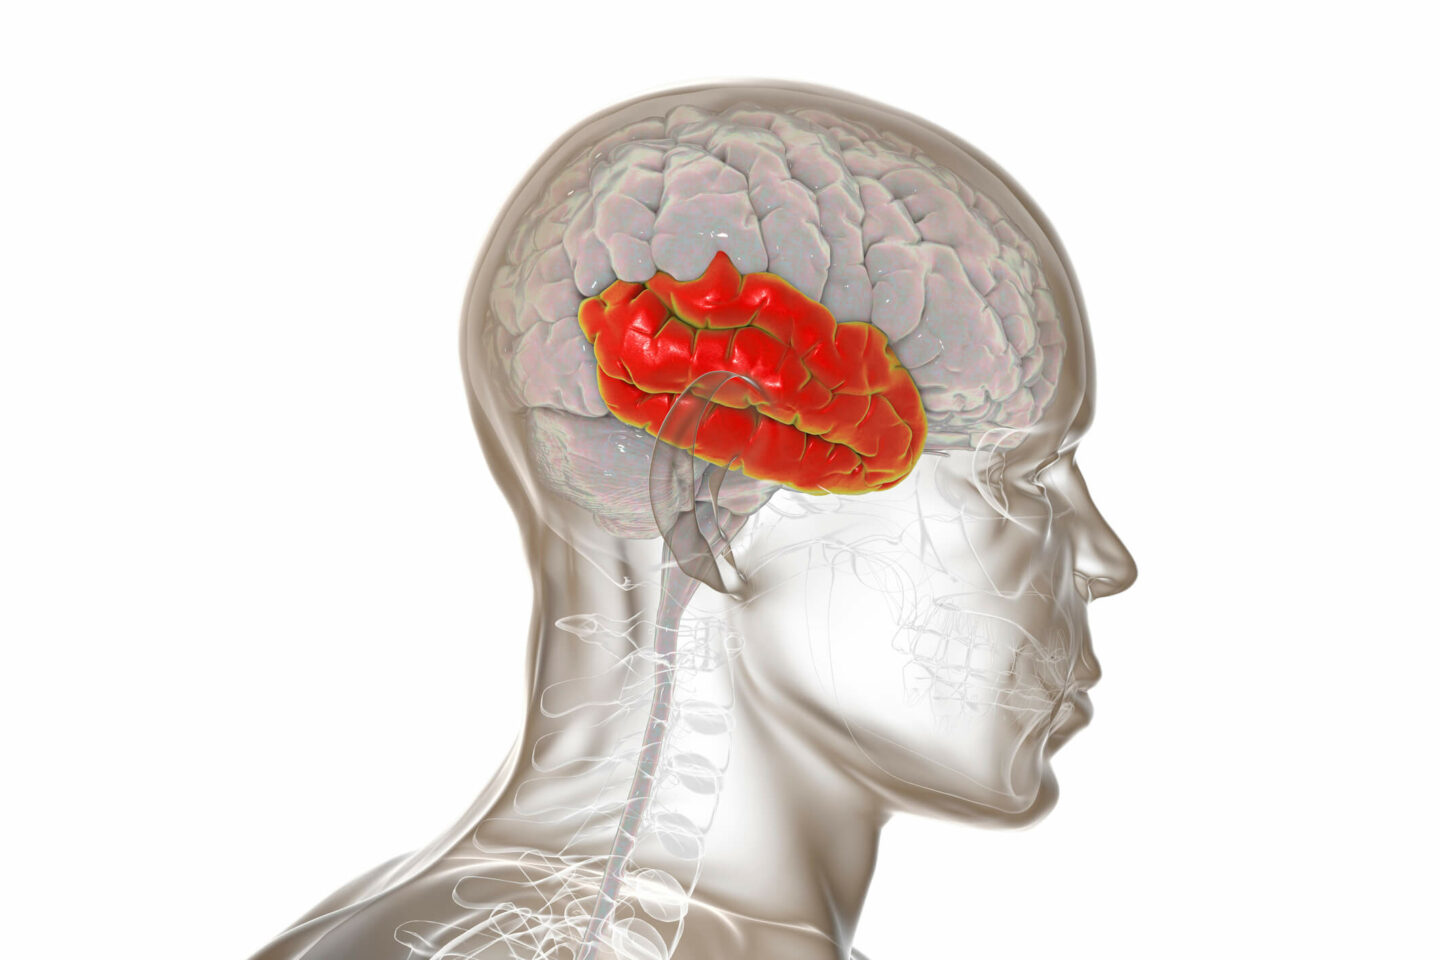 A transparent computer illustration of a human head, with the temporal lobe of the brain highlighted in red.